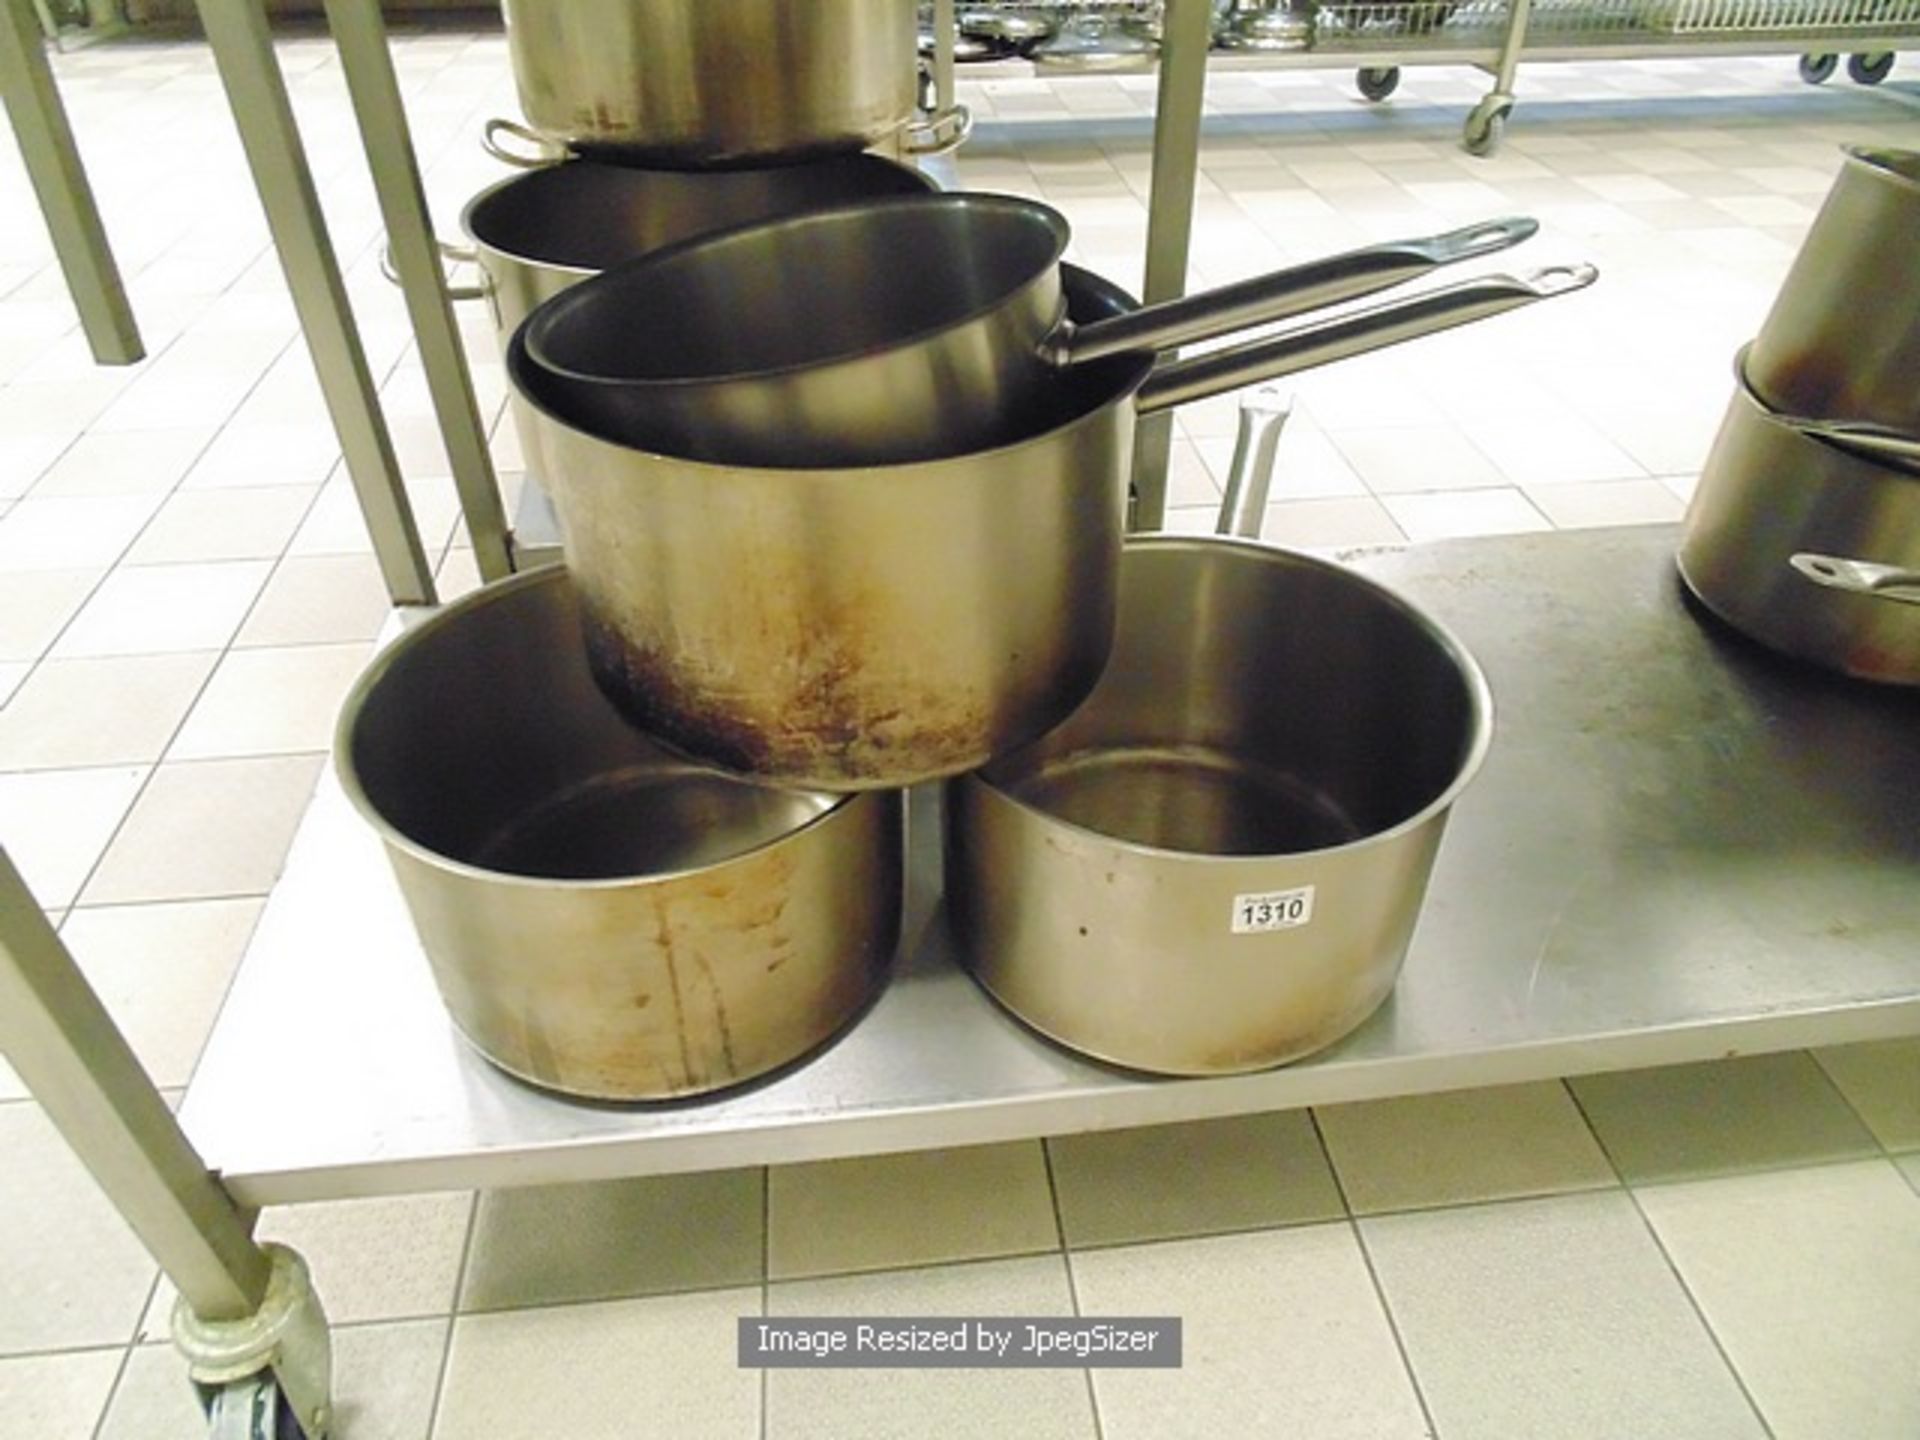 3 x Lagor stainless steel long handle saucepans 3 x 12.5 litre 300mm x 180mm and 1 x 7.5 litre 255mm